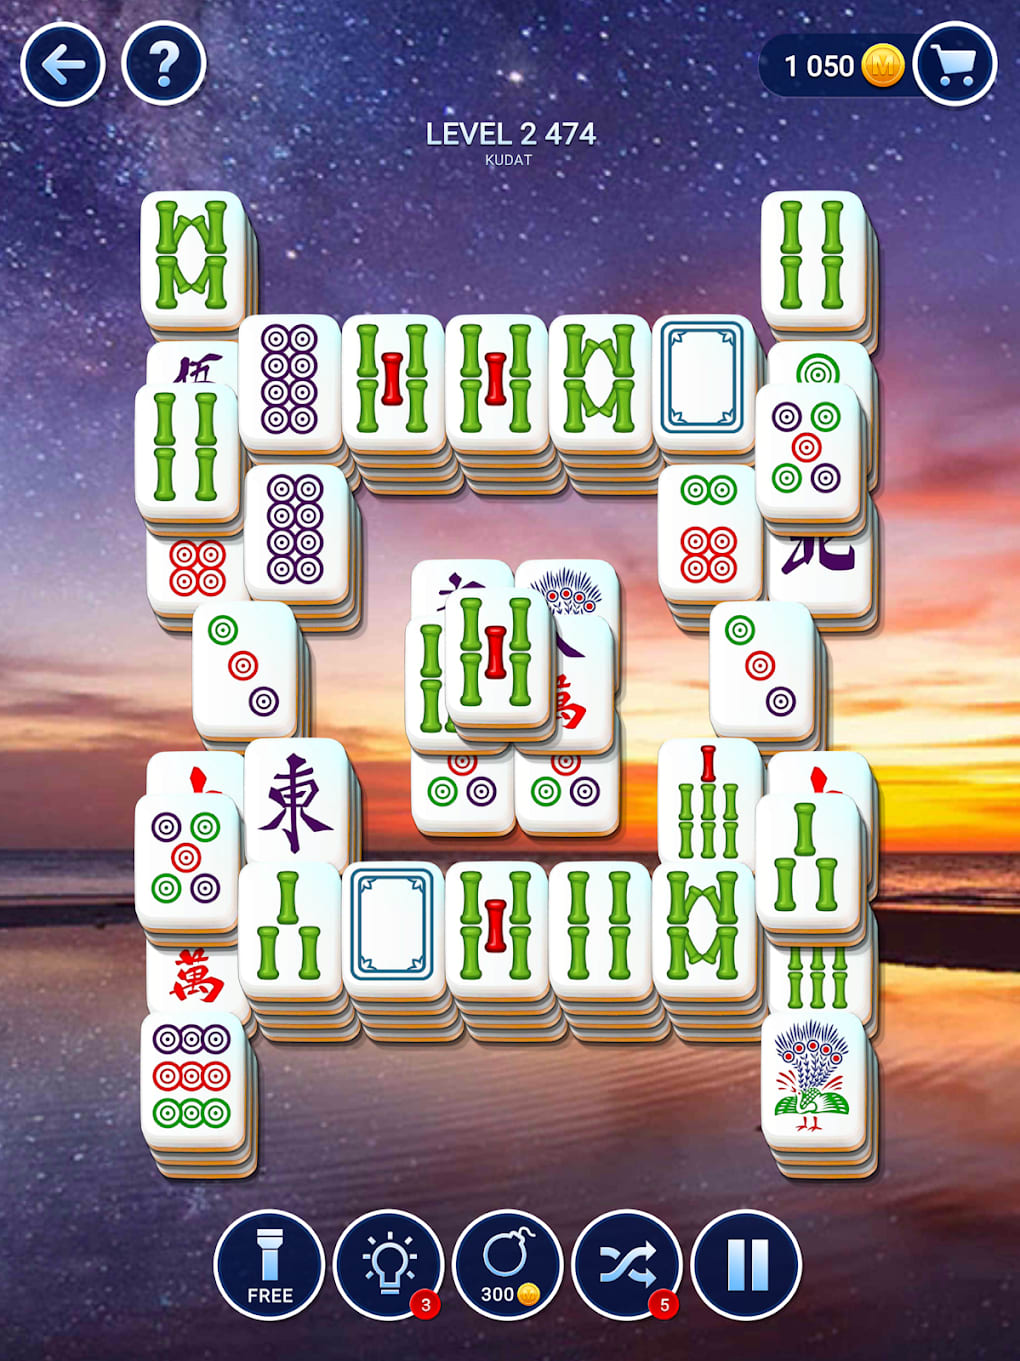 Mahjong Club - Solitaire Game – Apps on Google Play